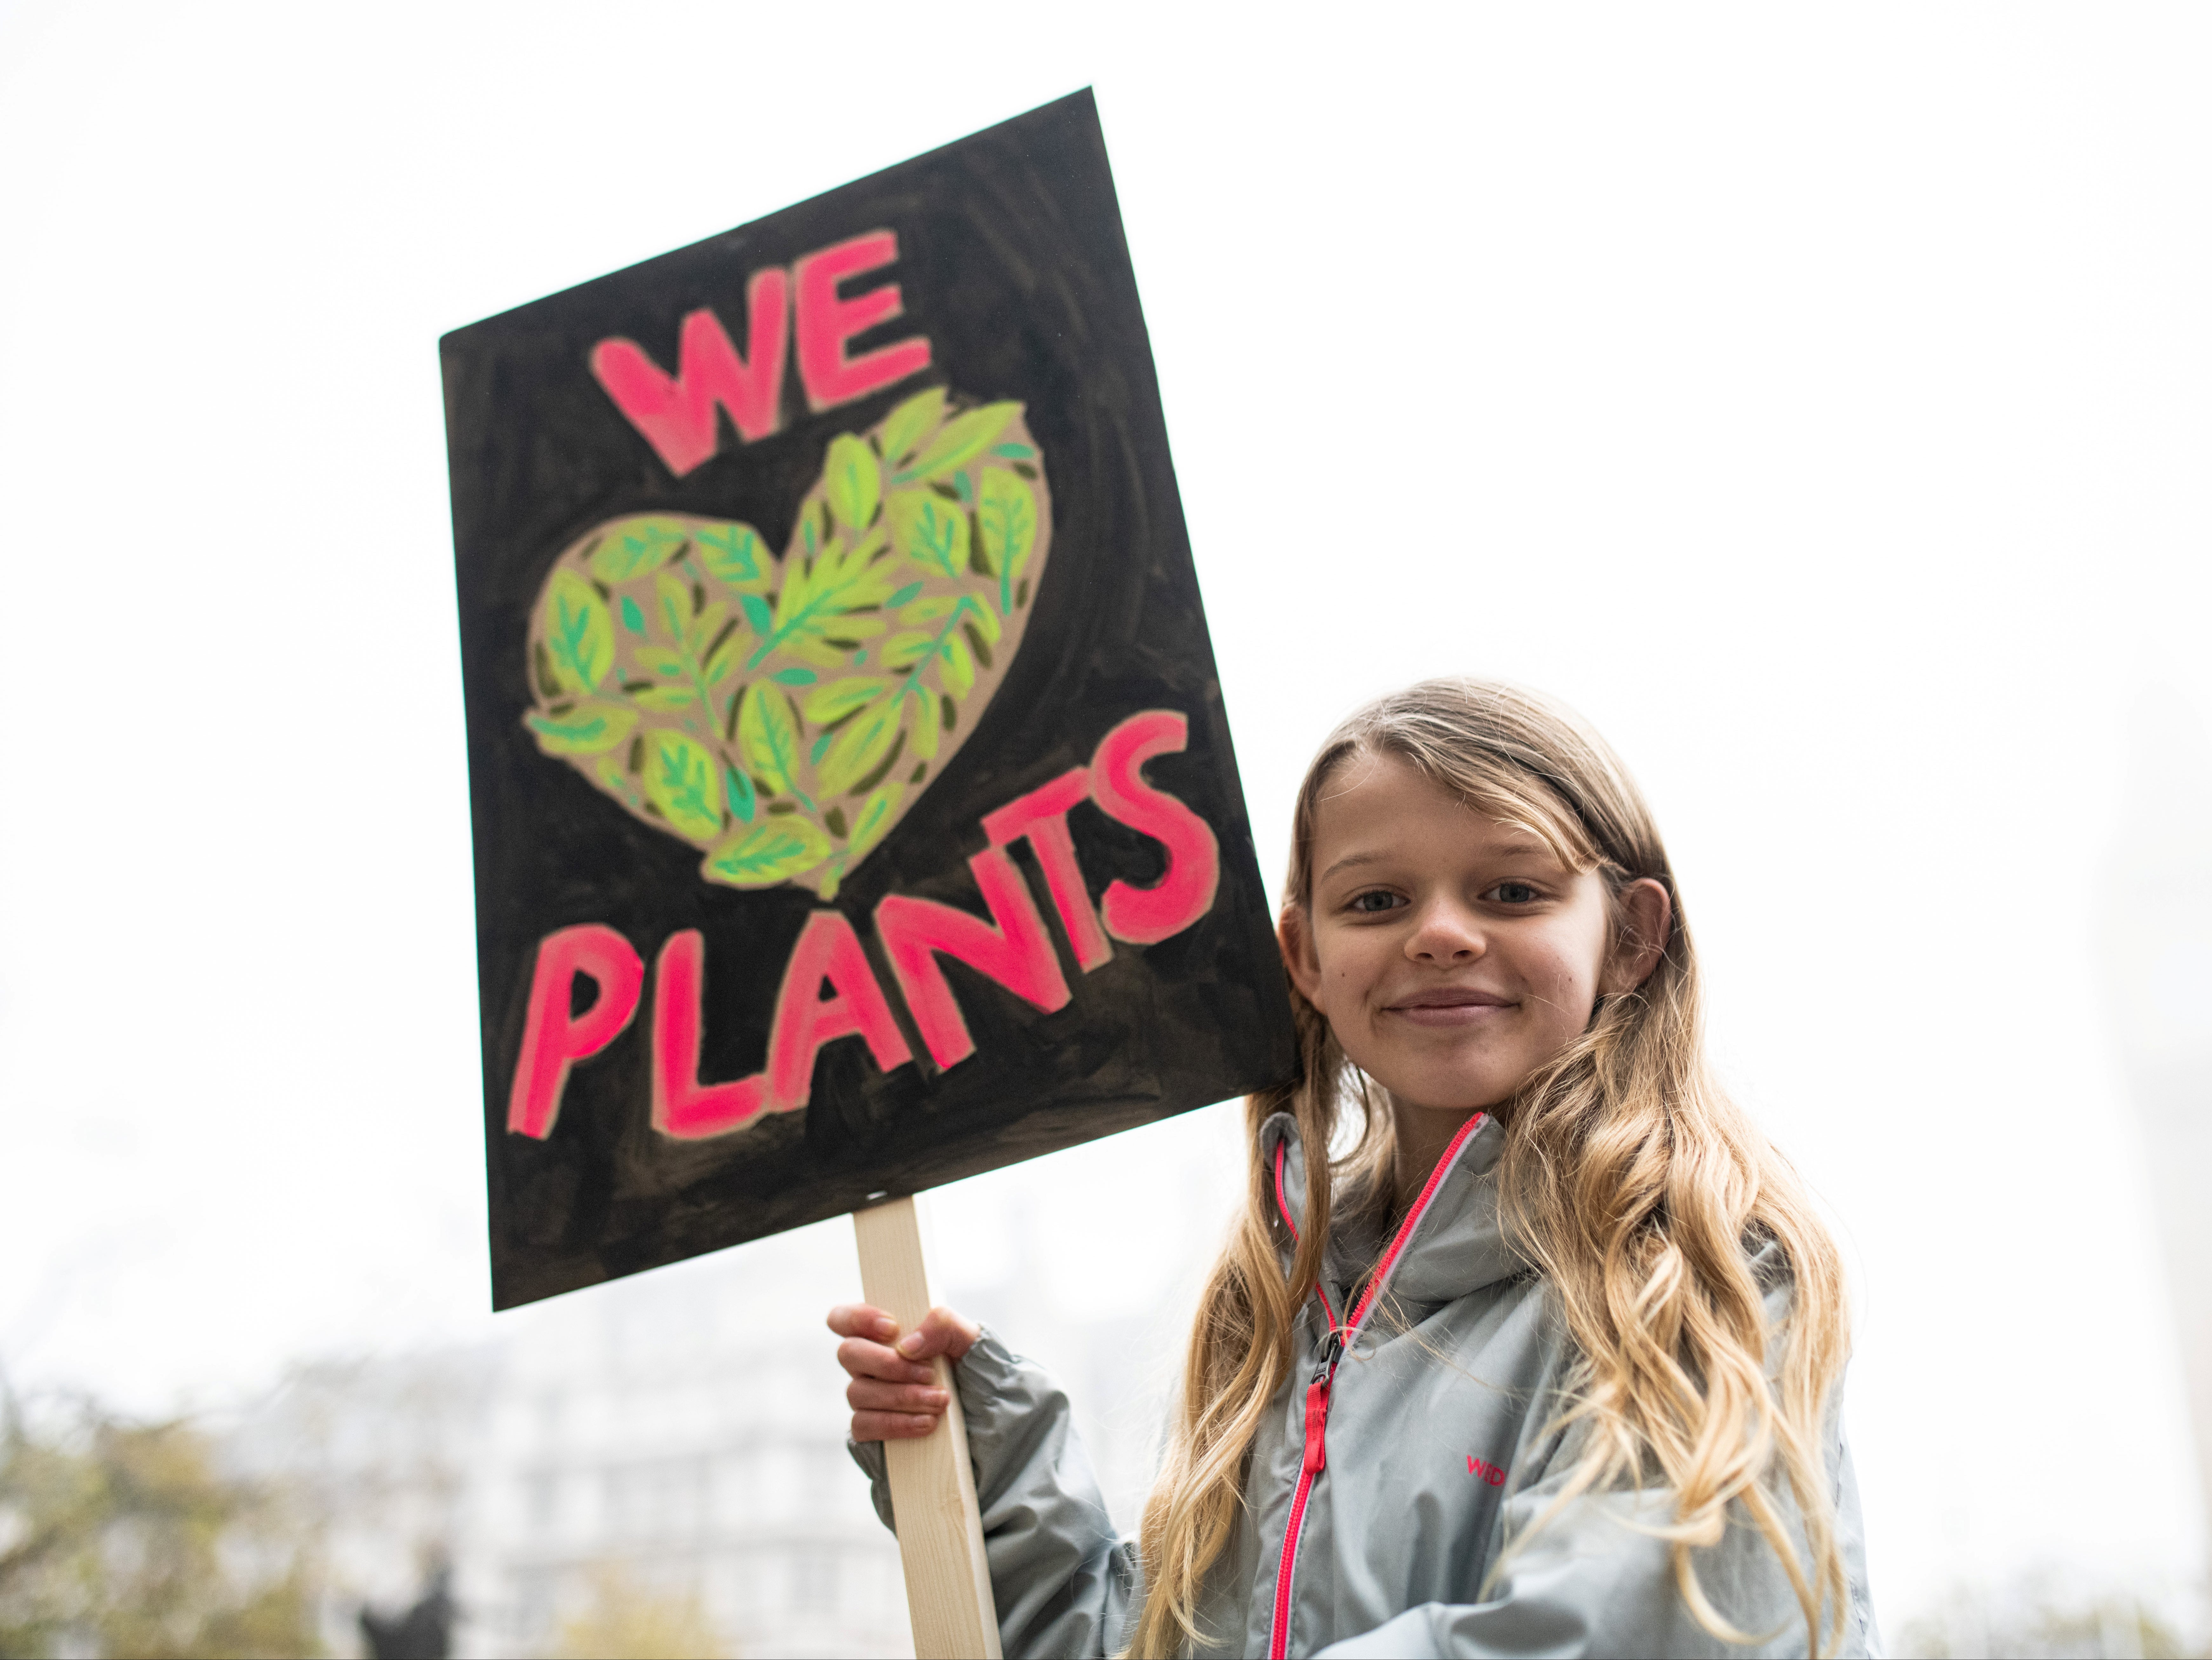 Young people have strong views on environmental issues, research suggests